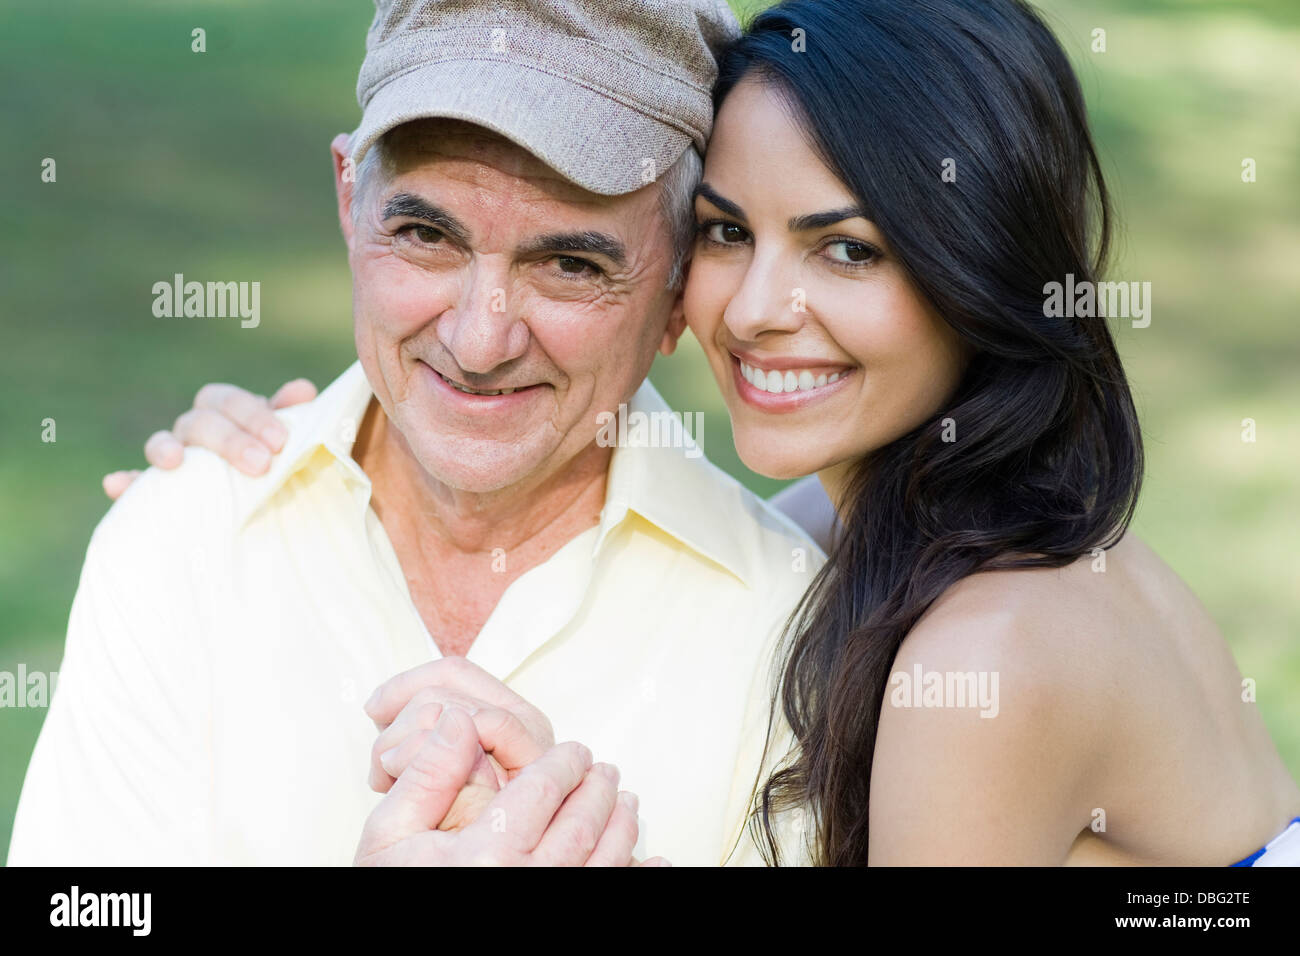 Hispanic father and daughter smiling outdoors Stock Photo